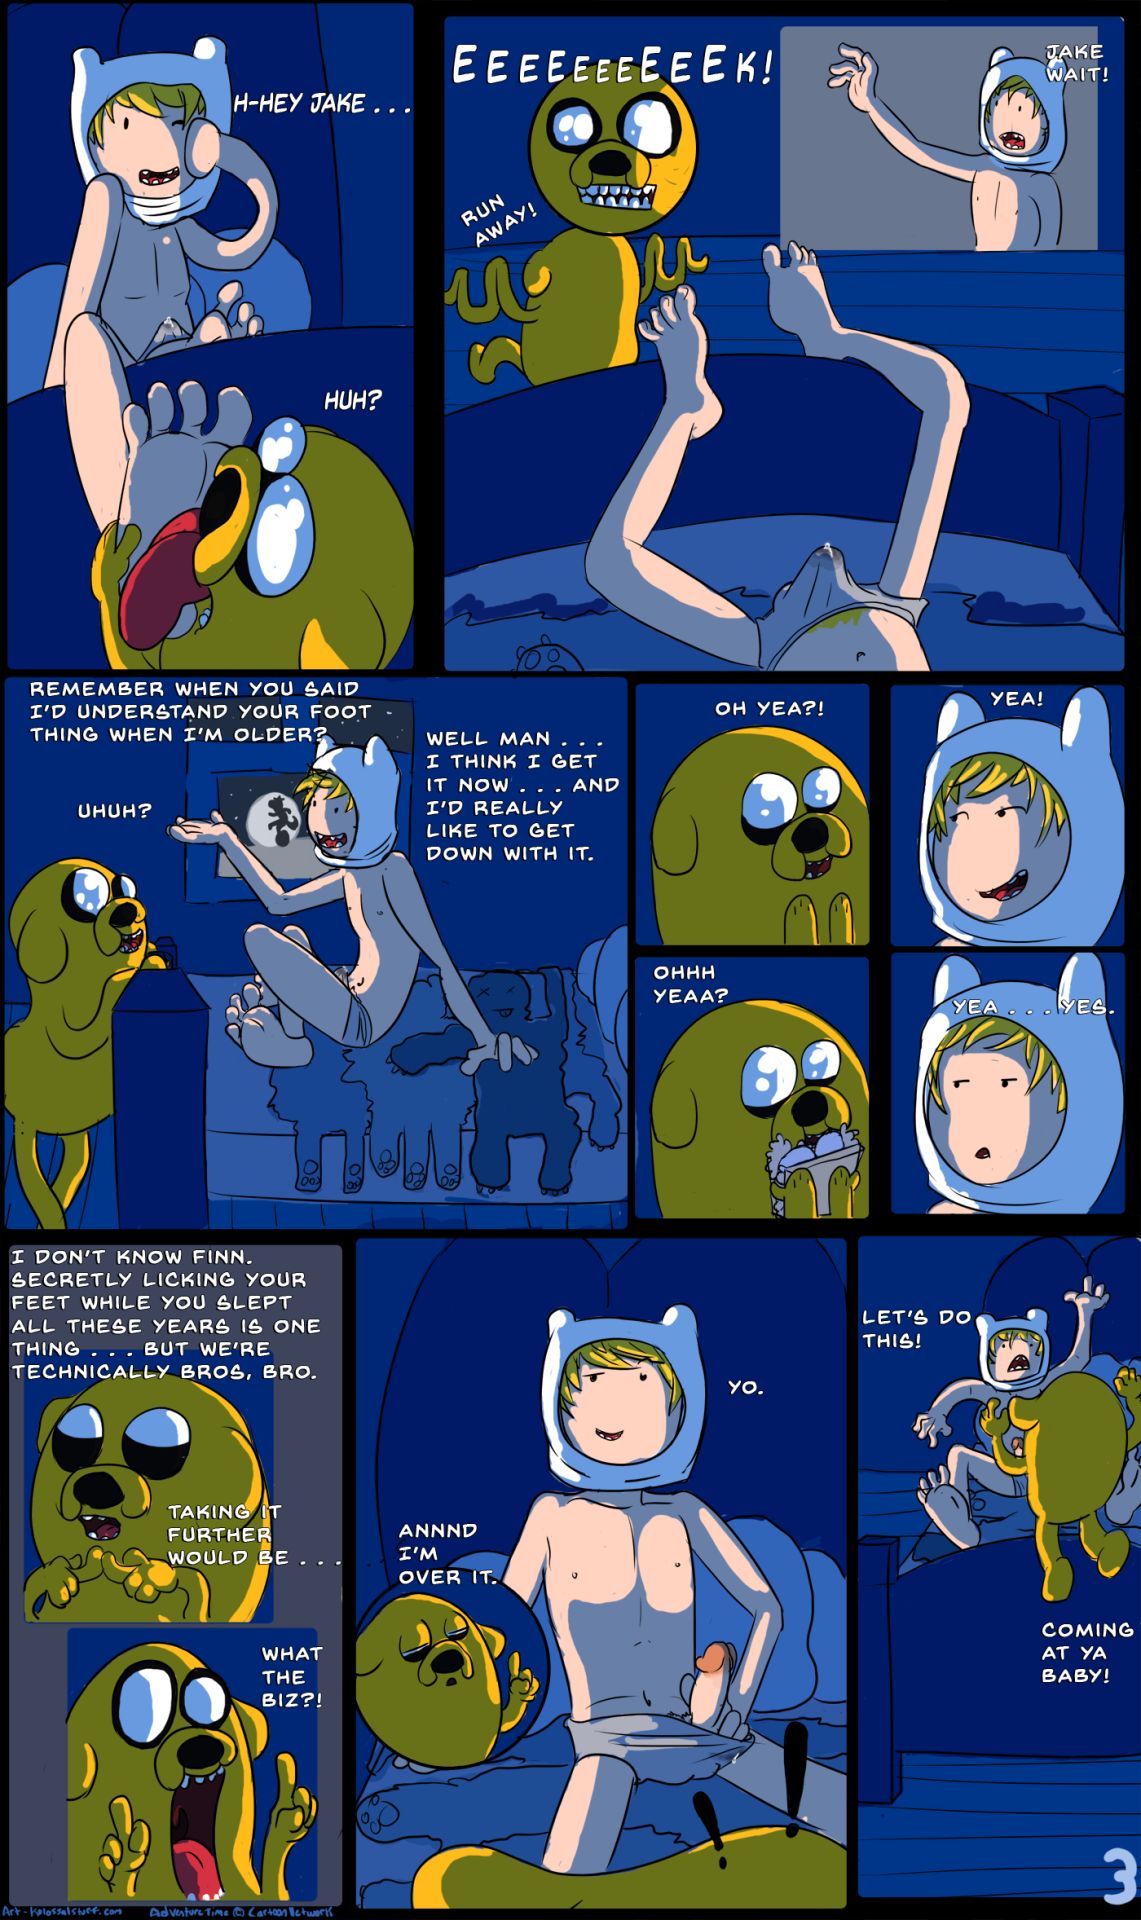 Adventure Time Foot Porn - Finn's Birthday - Page 3 - IMHentai